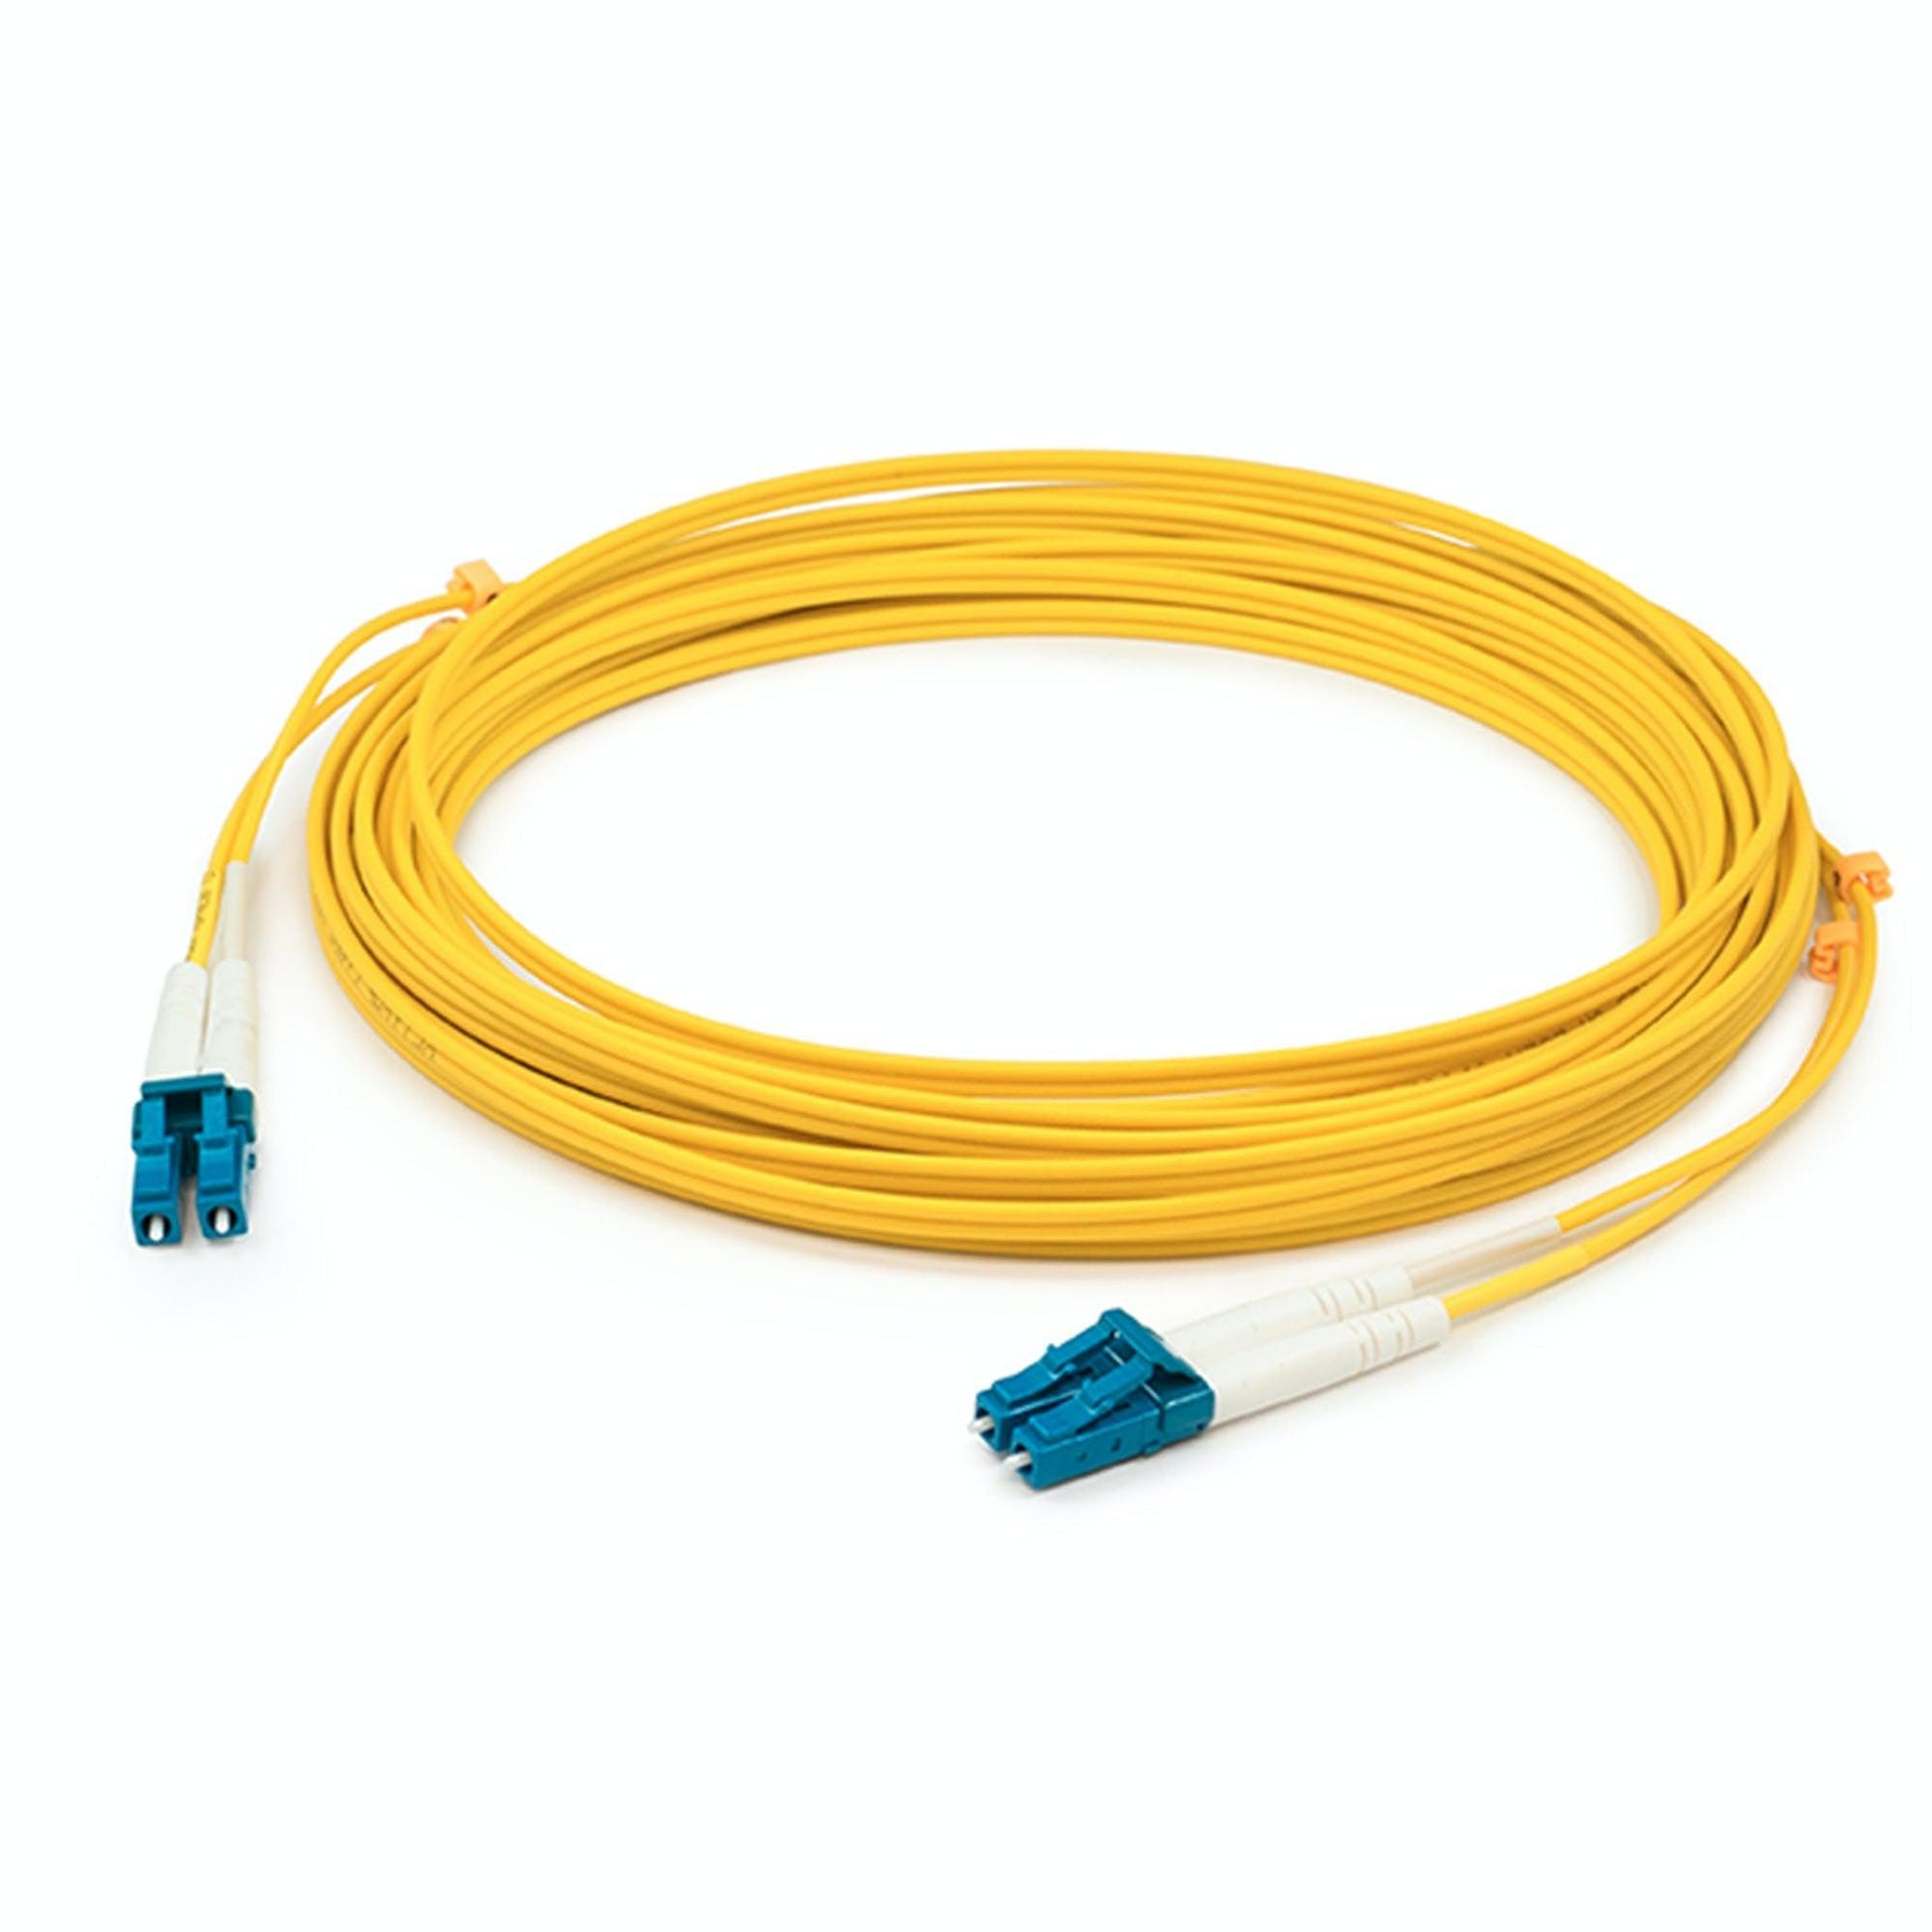 Addon Networks Add-Lc-Lc-60M9Smfp Fibre Optic Cable 60 M Ofnp Os2 Yellow